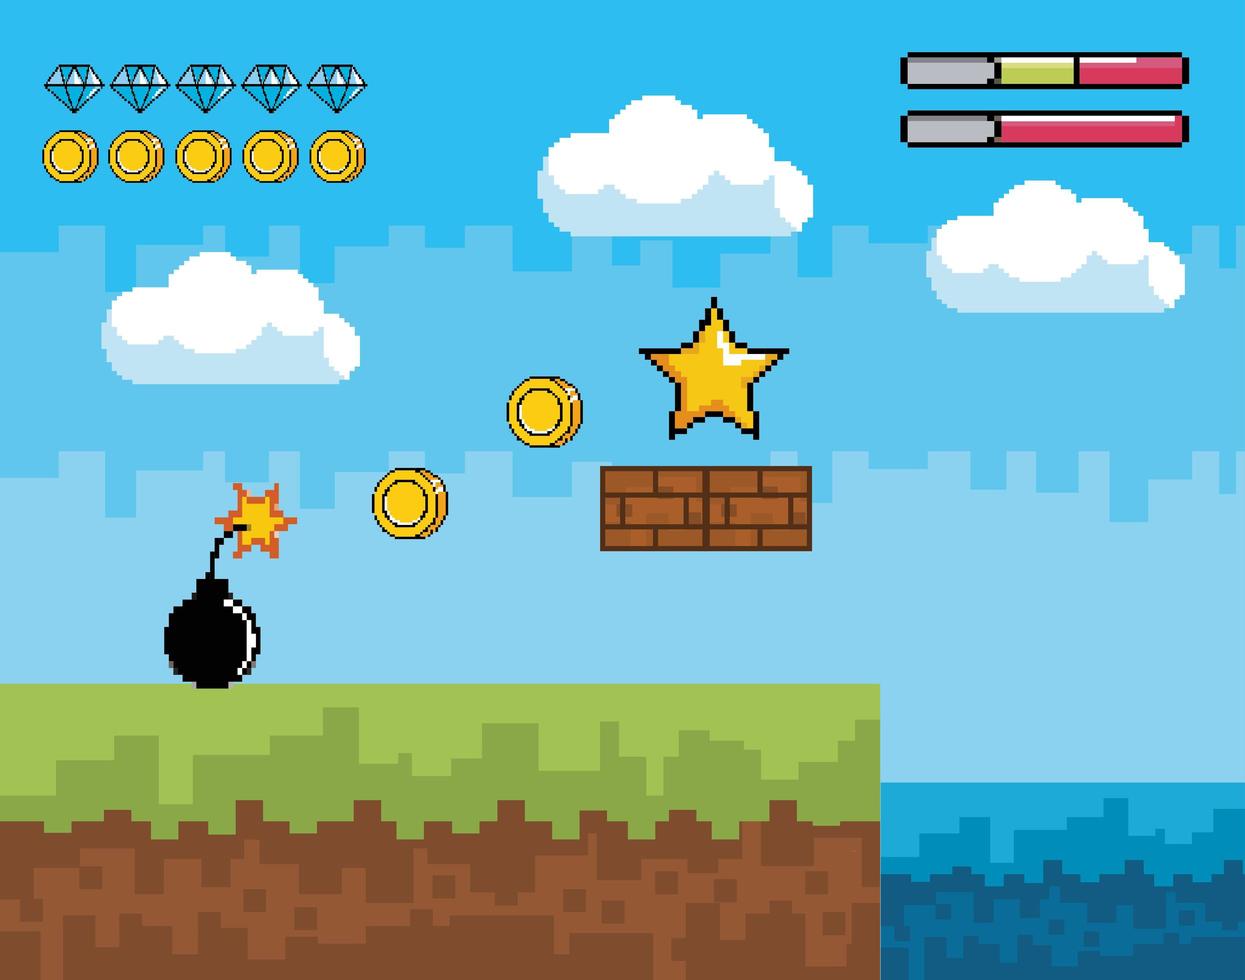 Videogame scene with star, coins, and bomb vector